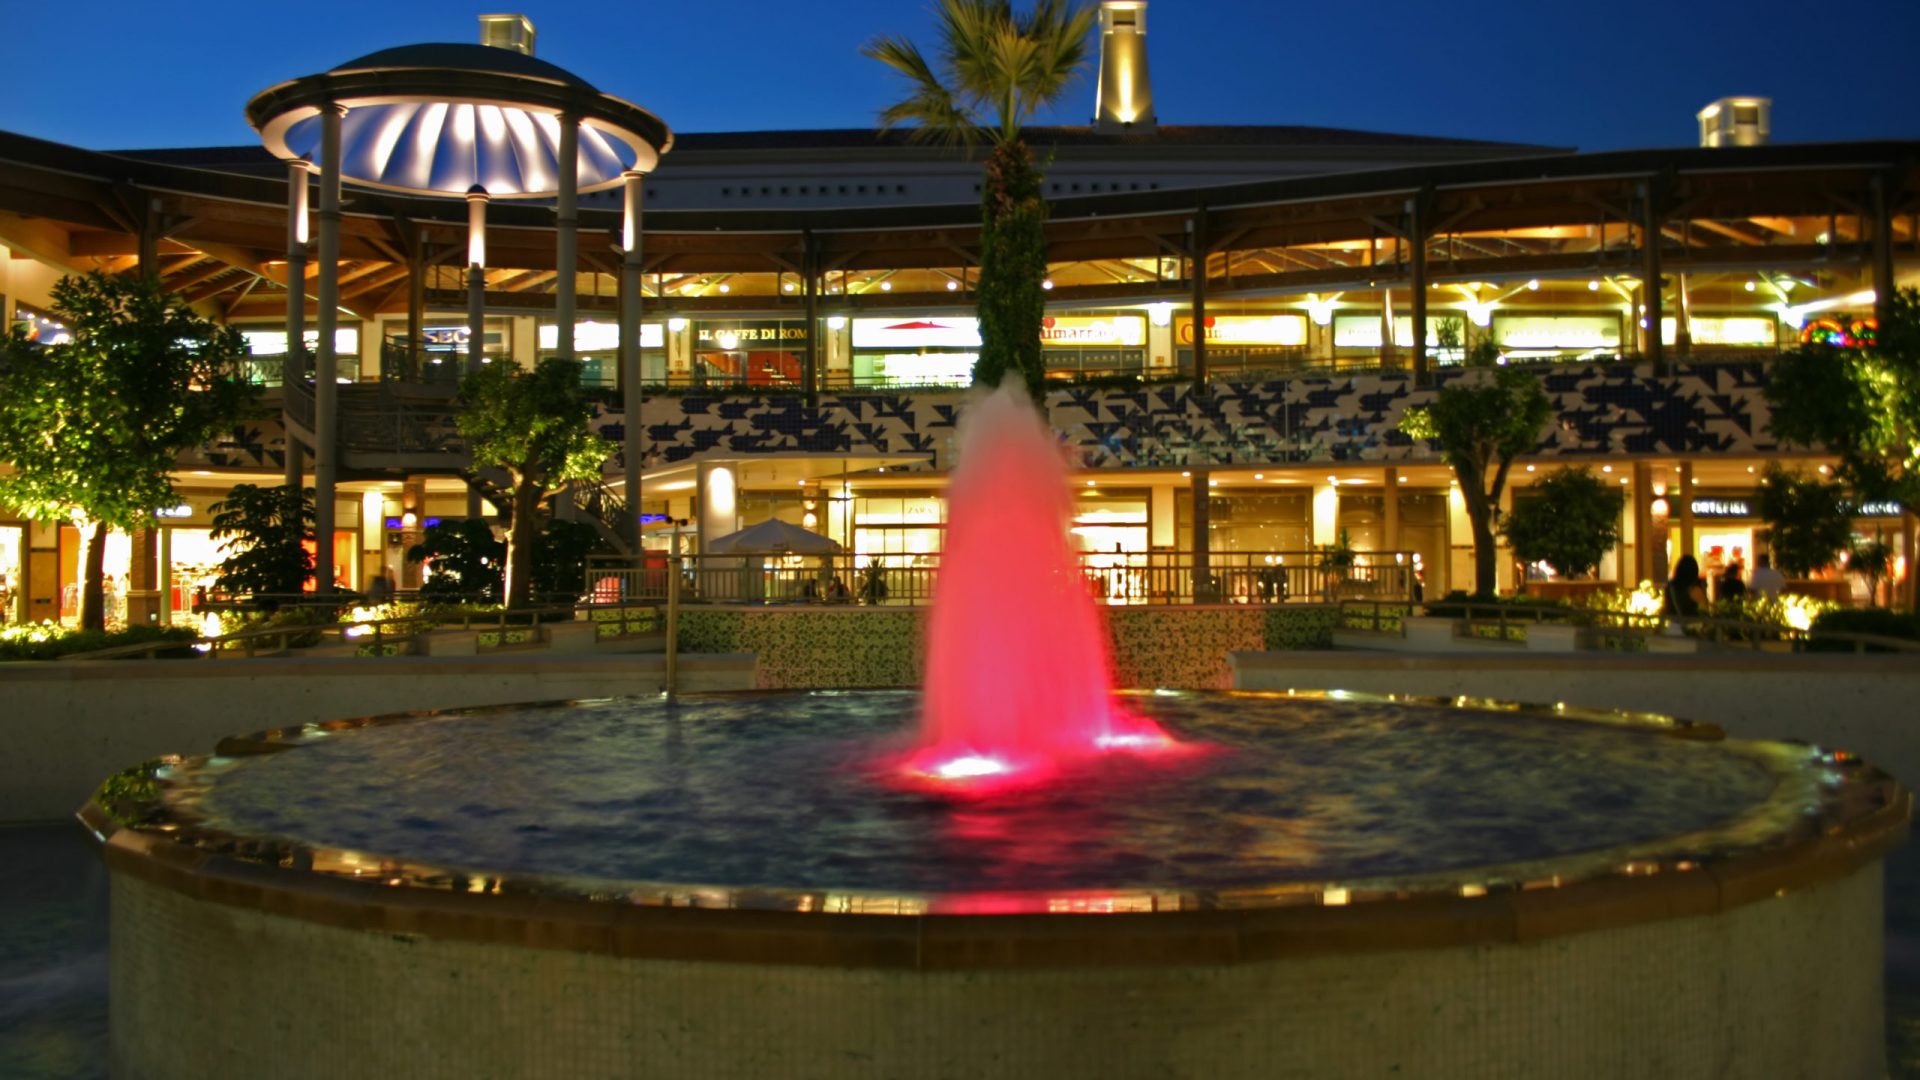 partial view of the architecture an outdoor mall with fountain